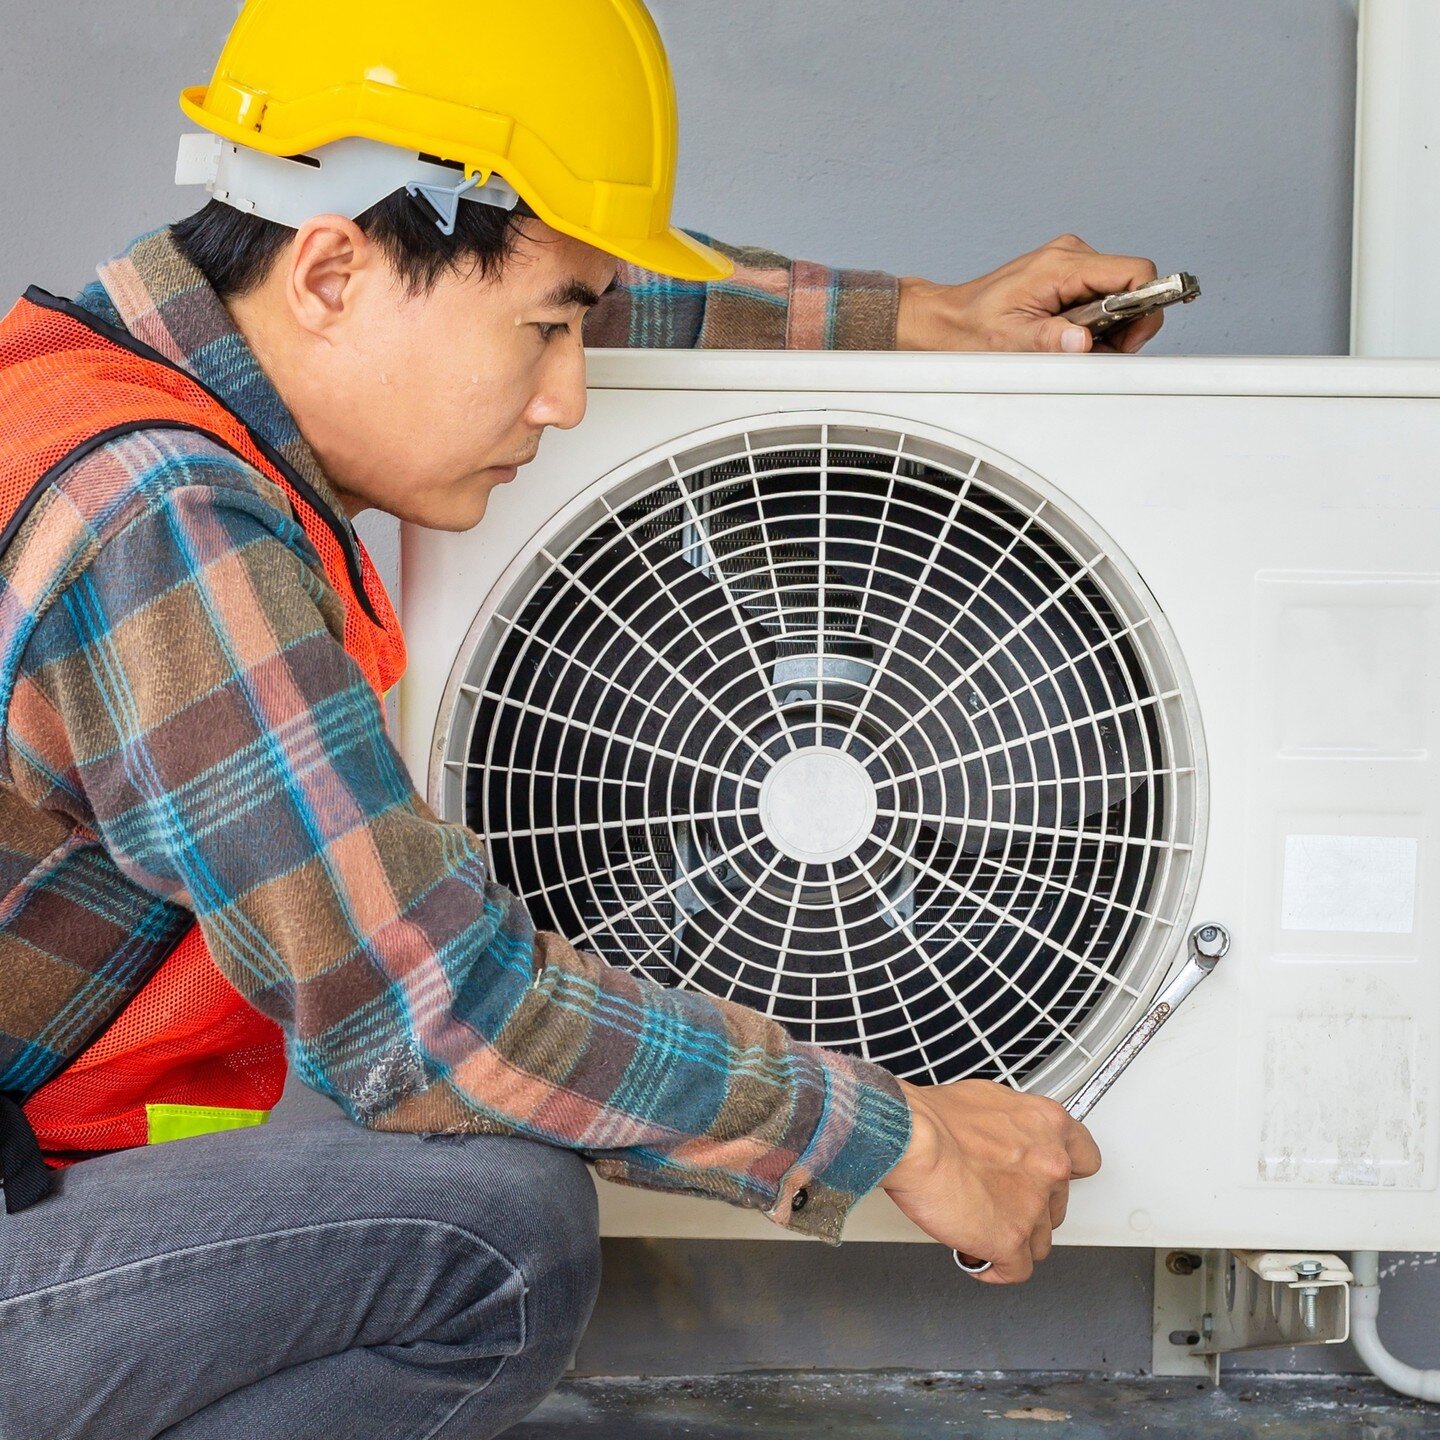 📢ODOE is now accepting rebate reservations for the Oregon Rental Home Heat Pump Program. Interested in installing heat pumps in your rental properties? Contact an approved contractor, who can reserve rebates on your behalf. Learn more - link in bio!